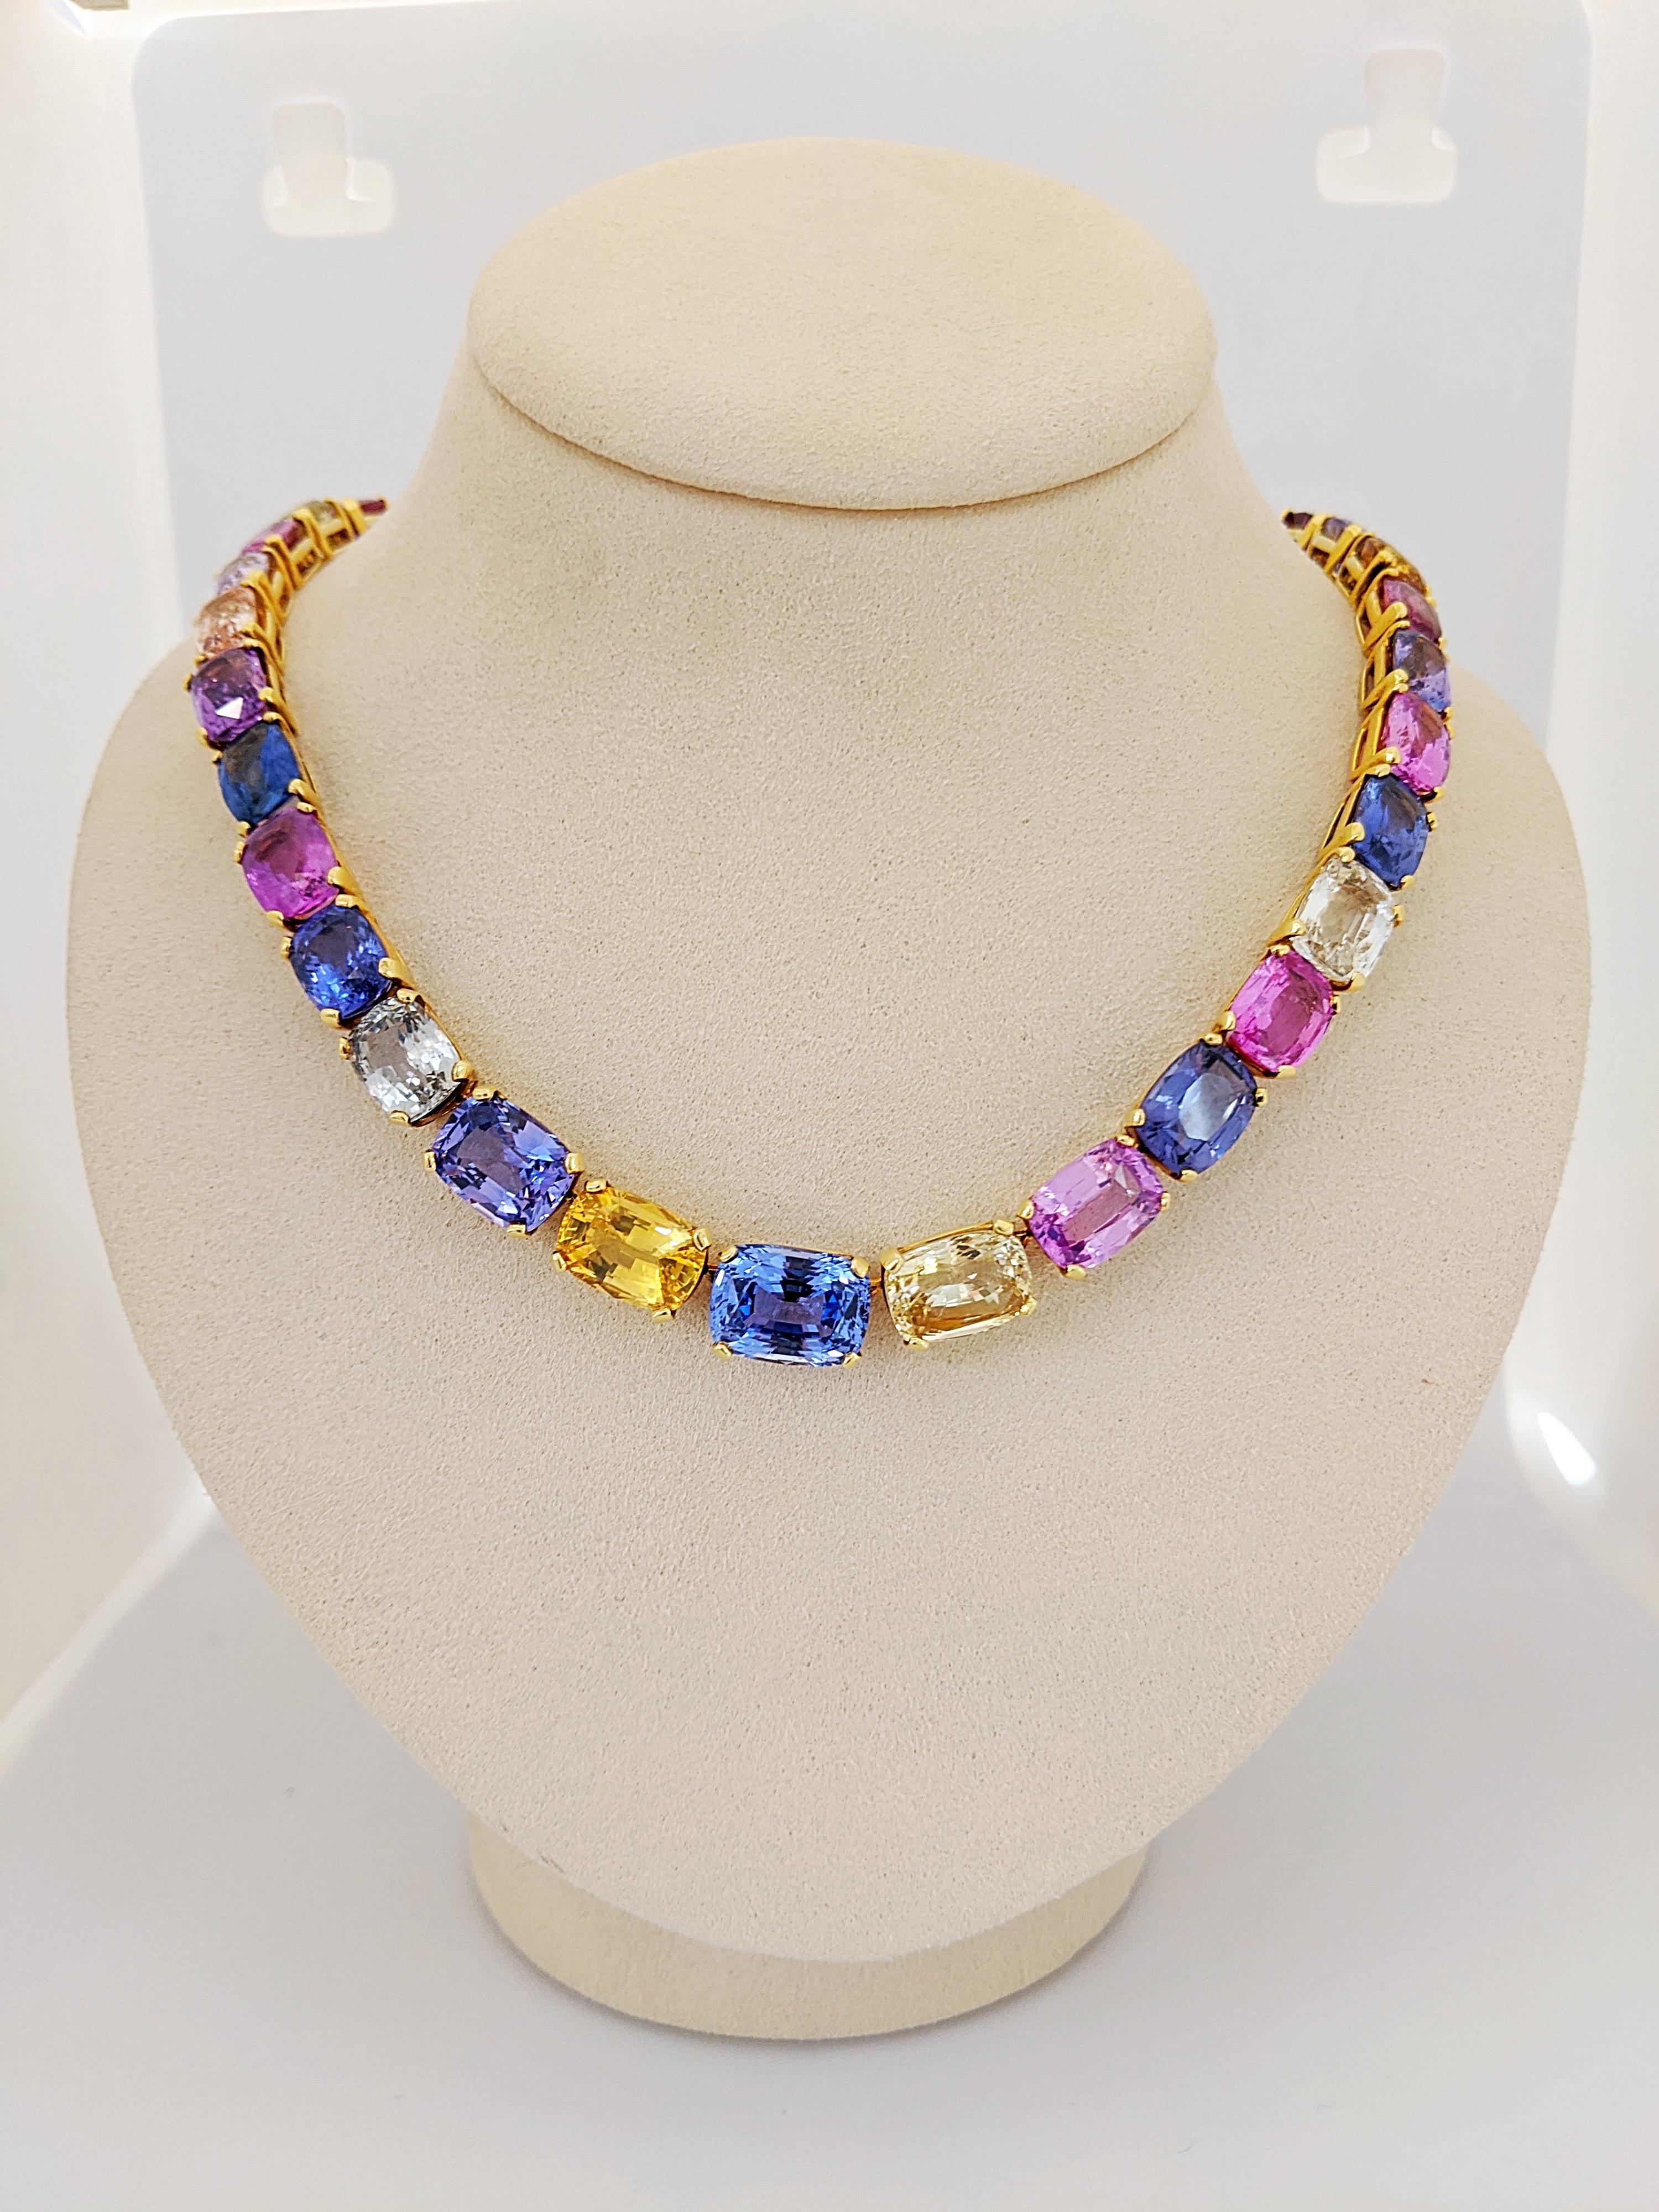 This show- stopping sapphire necklace is comprised of an array of natural colored sapphires including blues, yellow, pinks and purples, set in 18kt yellow gold. The brilliantly colored cushion cut sapphires graduate in size and lay elegantly on ones